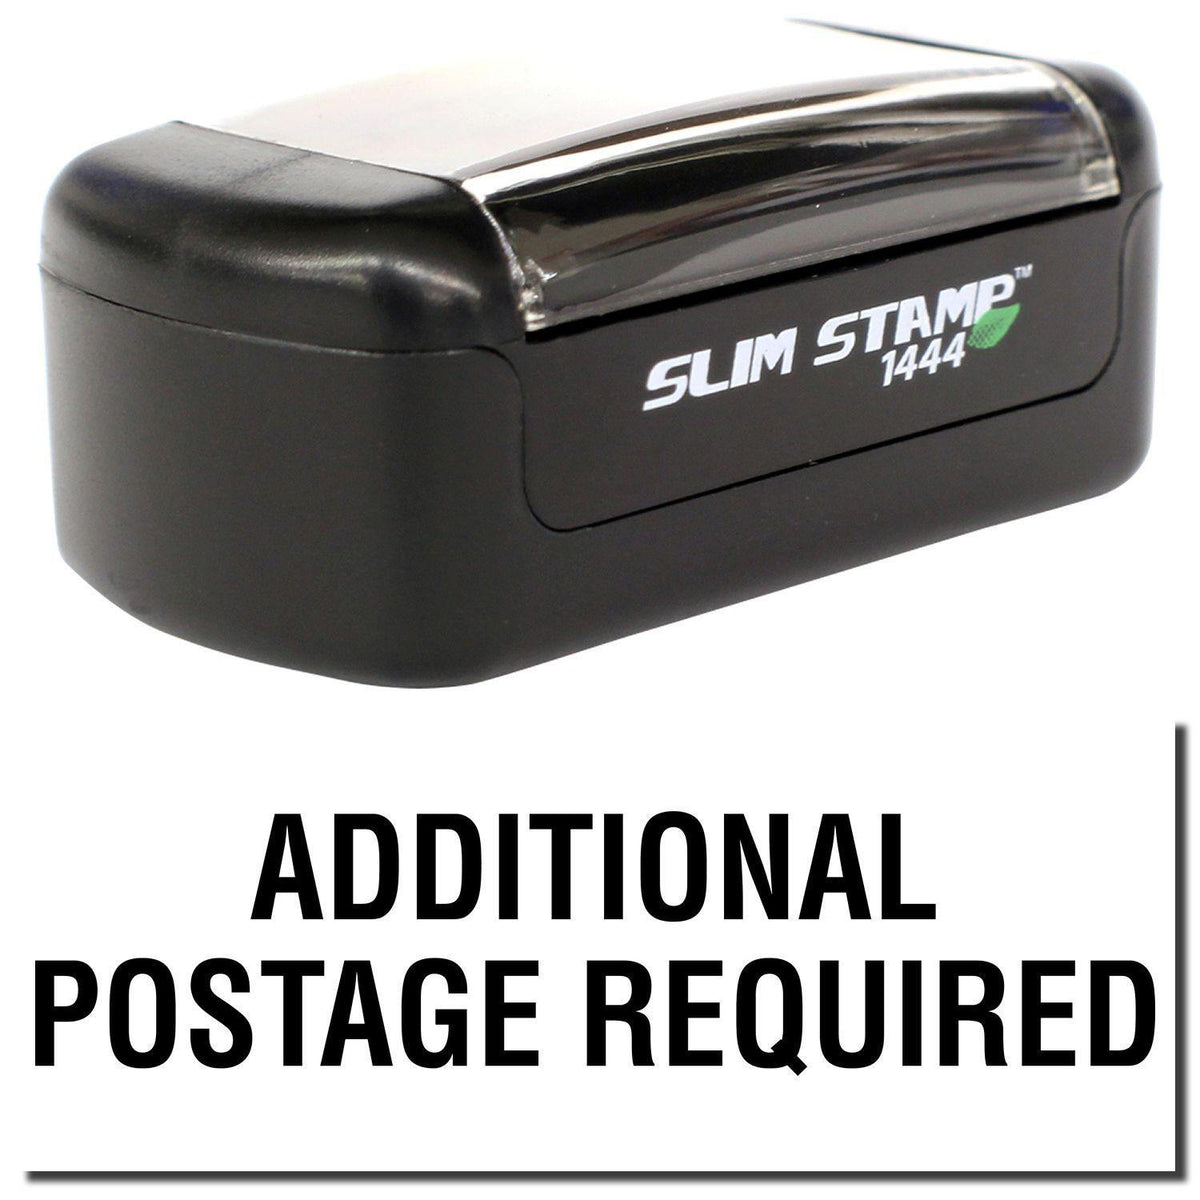 A stock office pre-inked stamp with a stamped image showing how the text &quot;ADDITIONAL POSTAGE REQUIRED&quot; is displayed after stamping.